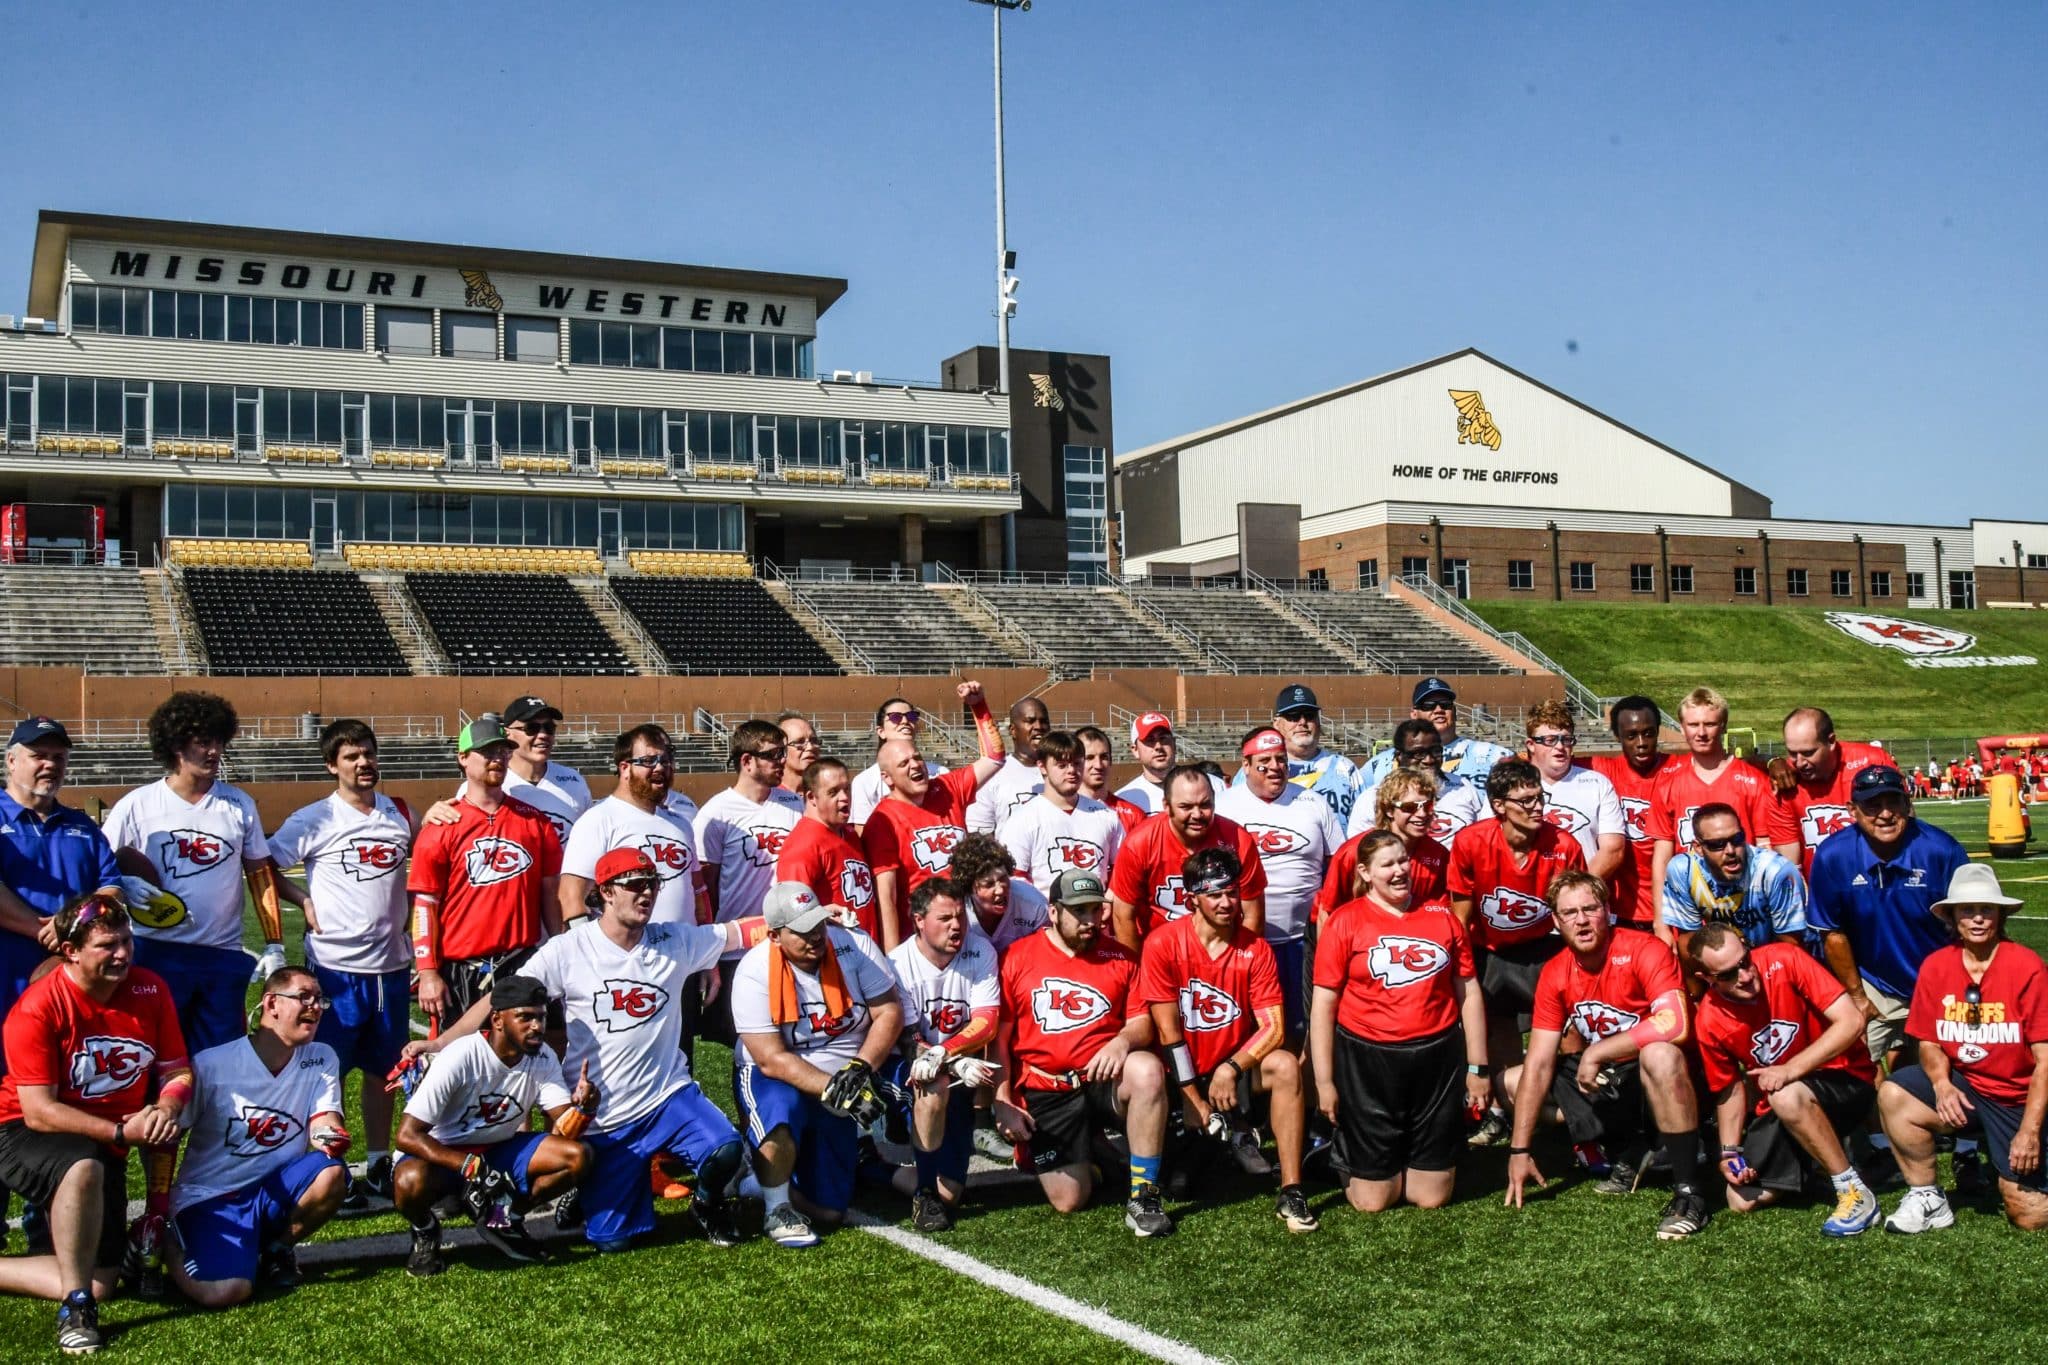 Special Olympics Missouri athletes played against athletes from Special Olympics Kansas at Spratt Stadium in St. Joseph, Mo. at Chiefs Training Camp on Thursday, August 4, 2022.